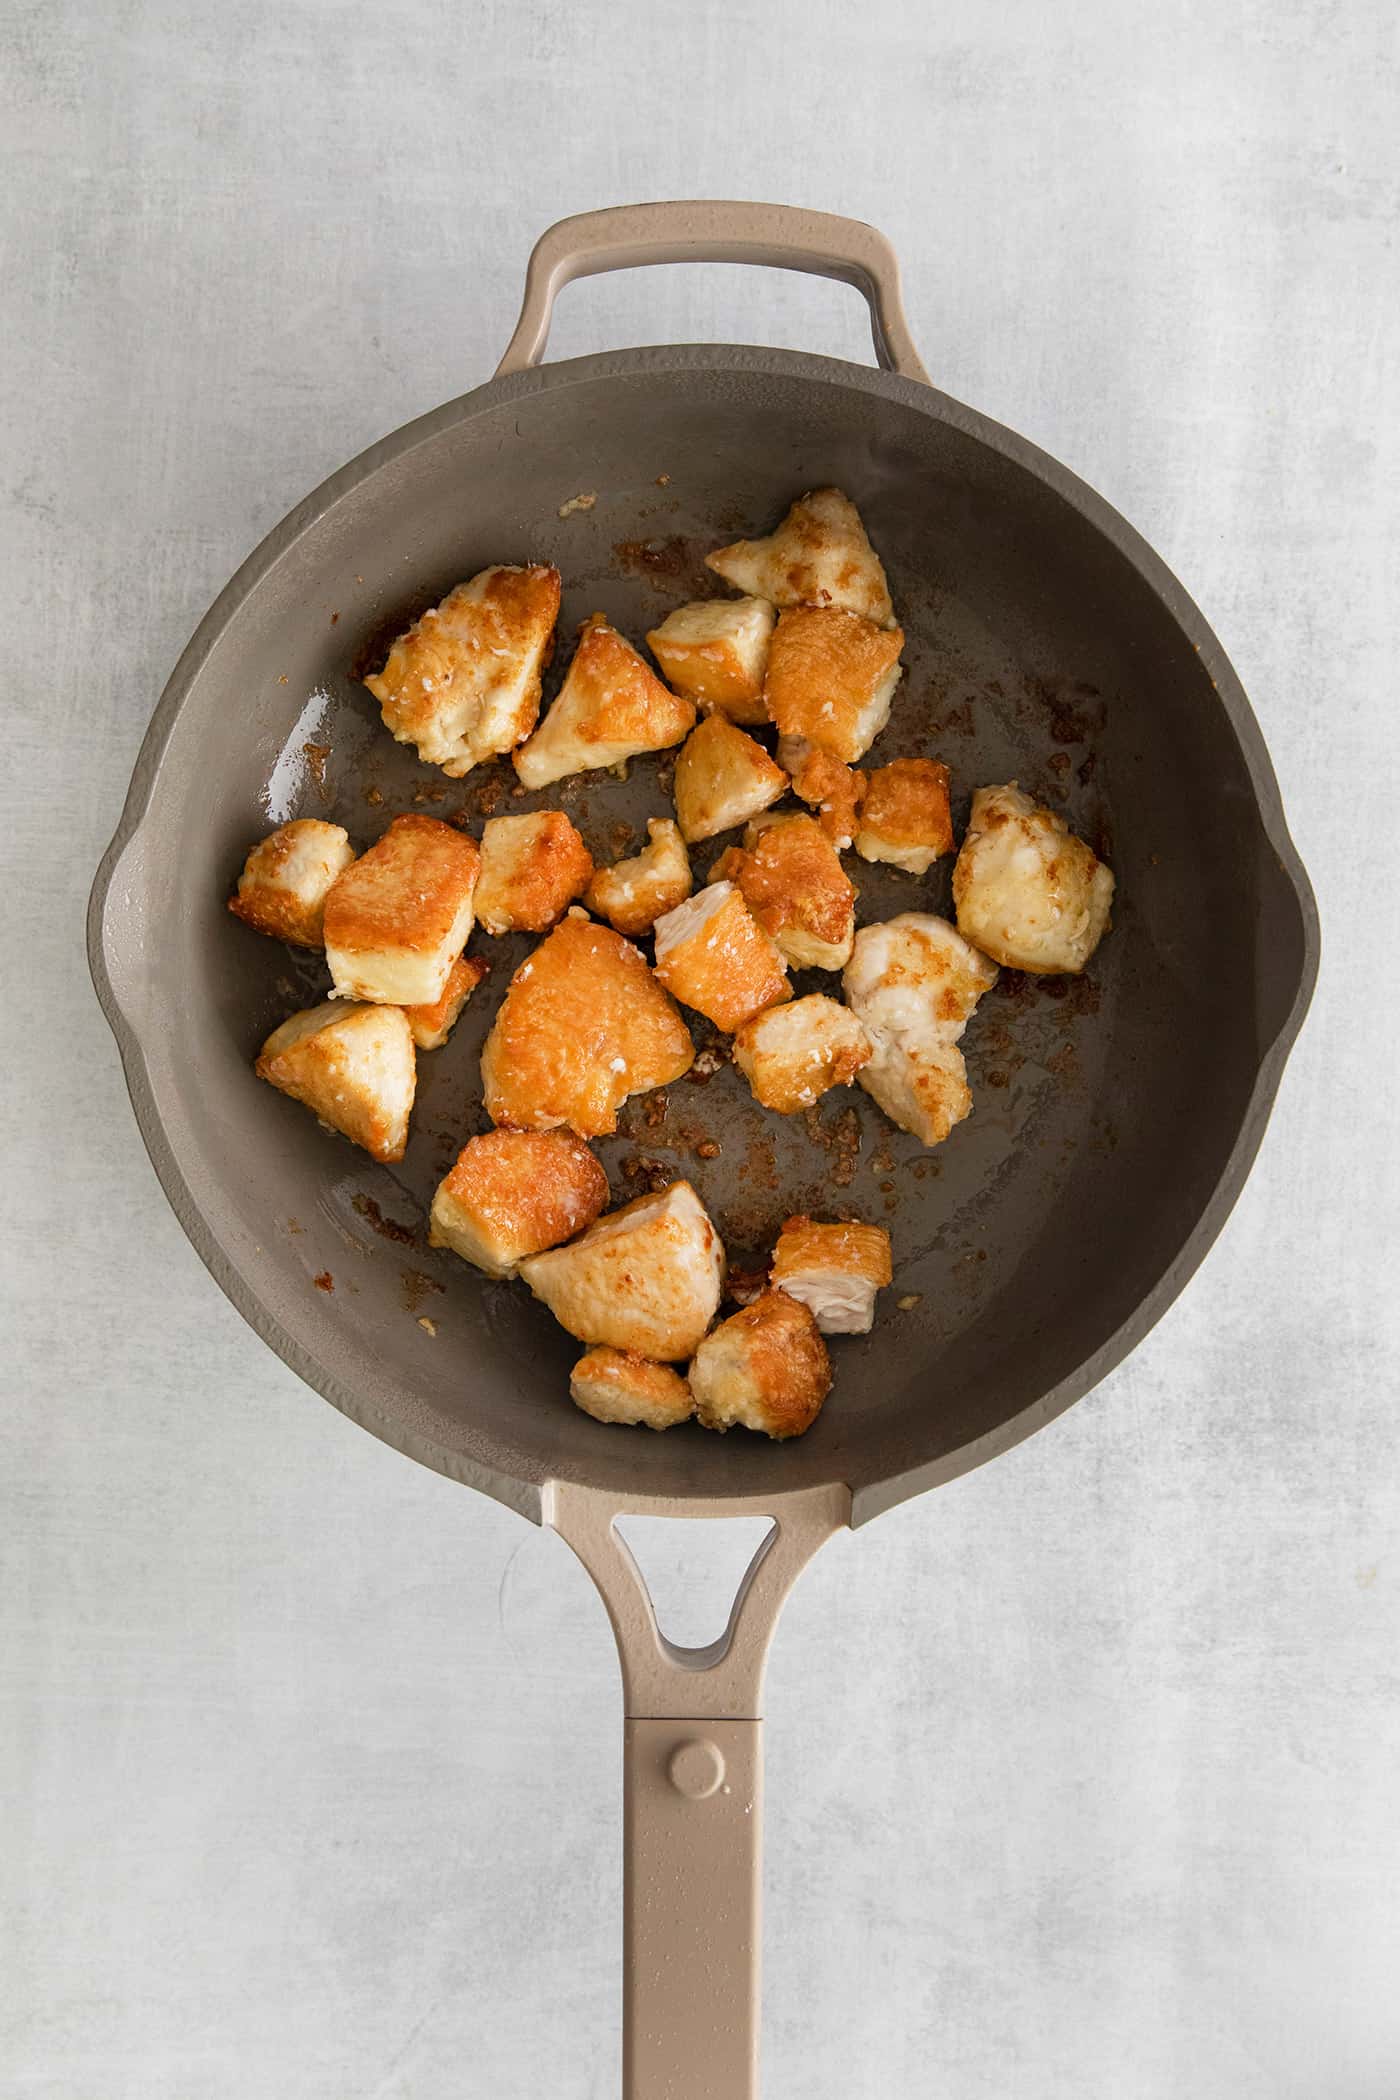 Chunks of chicken sauteing in a skillet